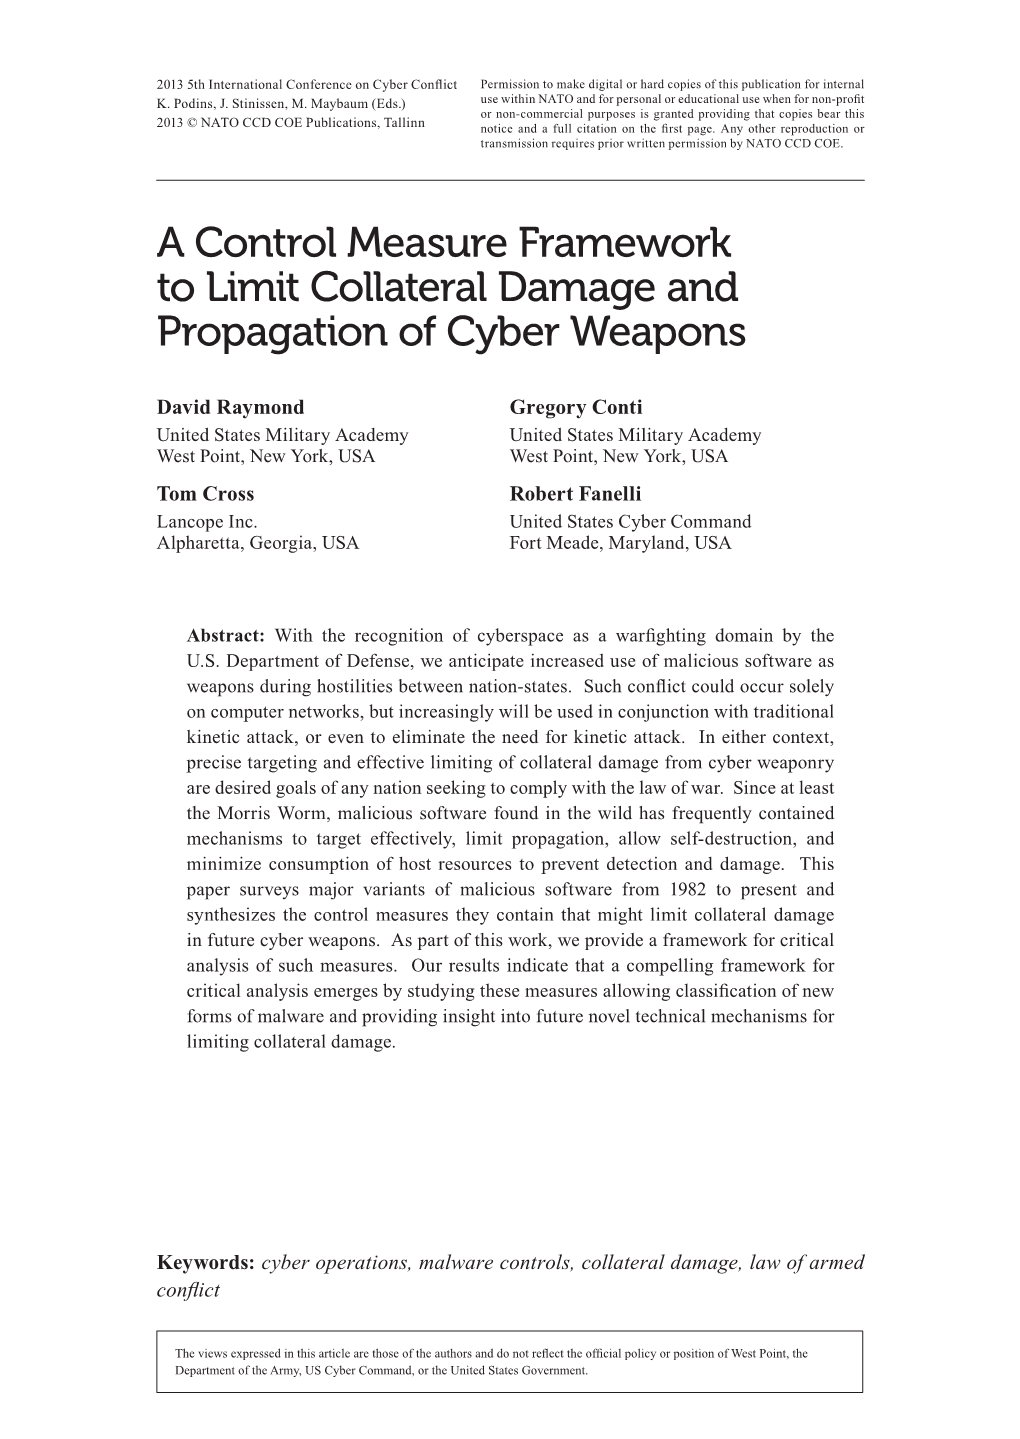 A Control Measure Framework to Limit Collateral Damage and Propagation of Cyber Weapons